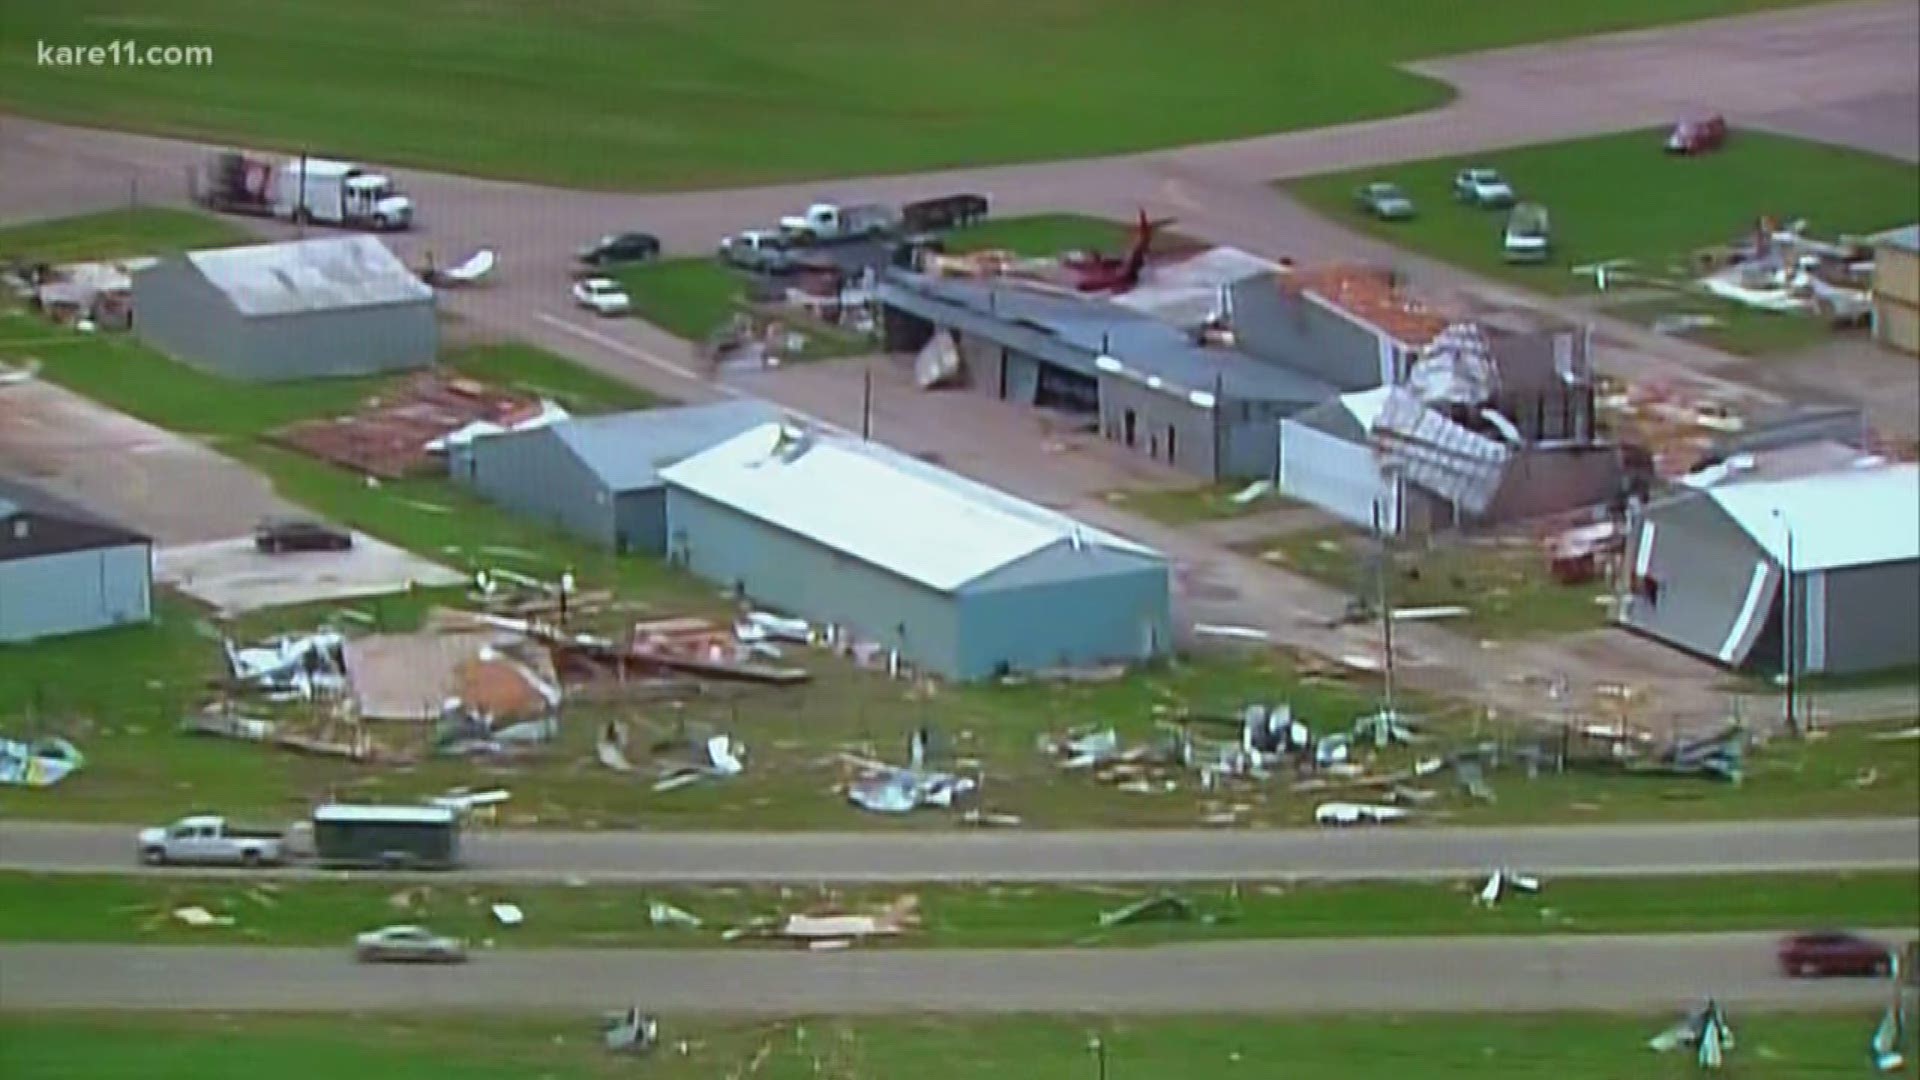 Tornadoes multiple tornado minnesota south reported mn southern nicollet touched brent damaged blank garage down